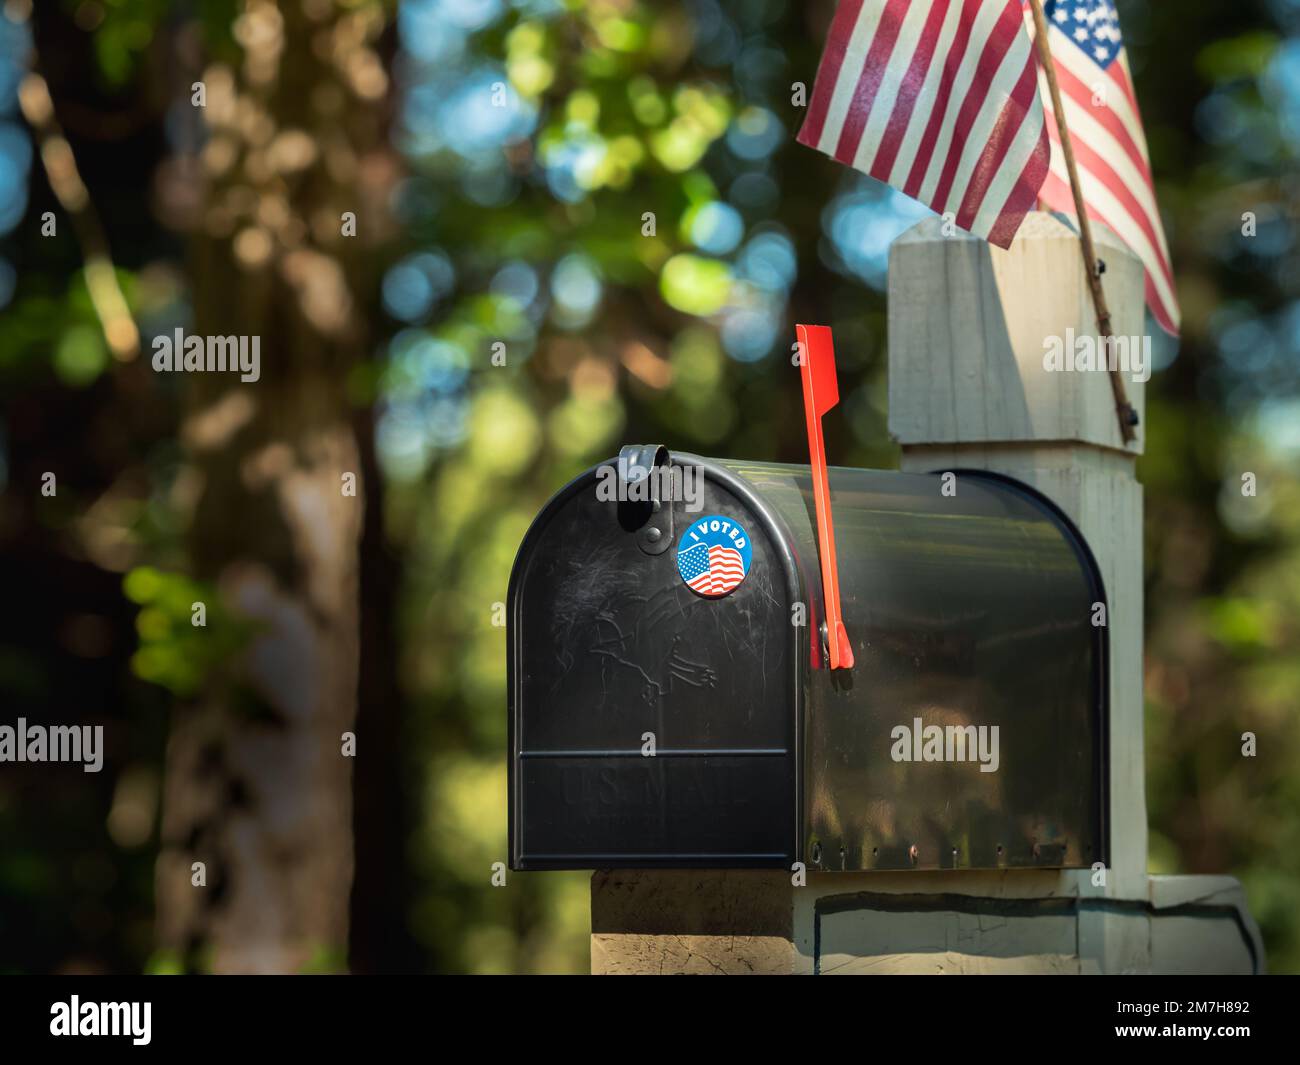 Absentee voter vote by mail ballot in U.S. Post Office residential mailbox. Stock Photo